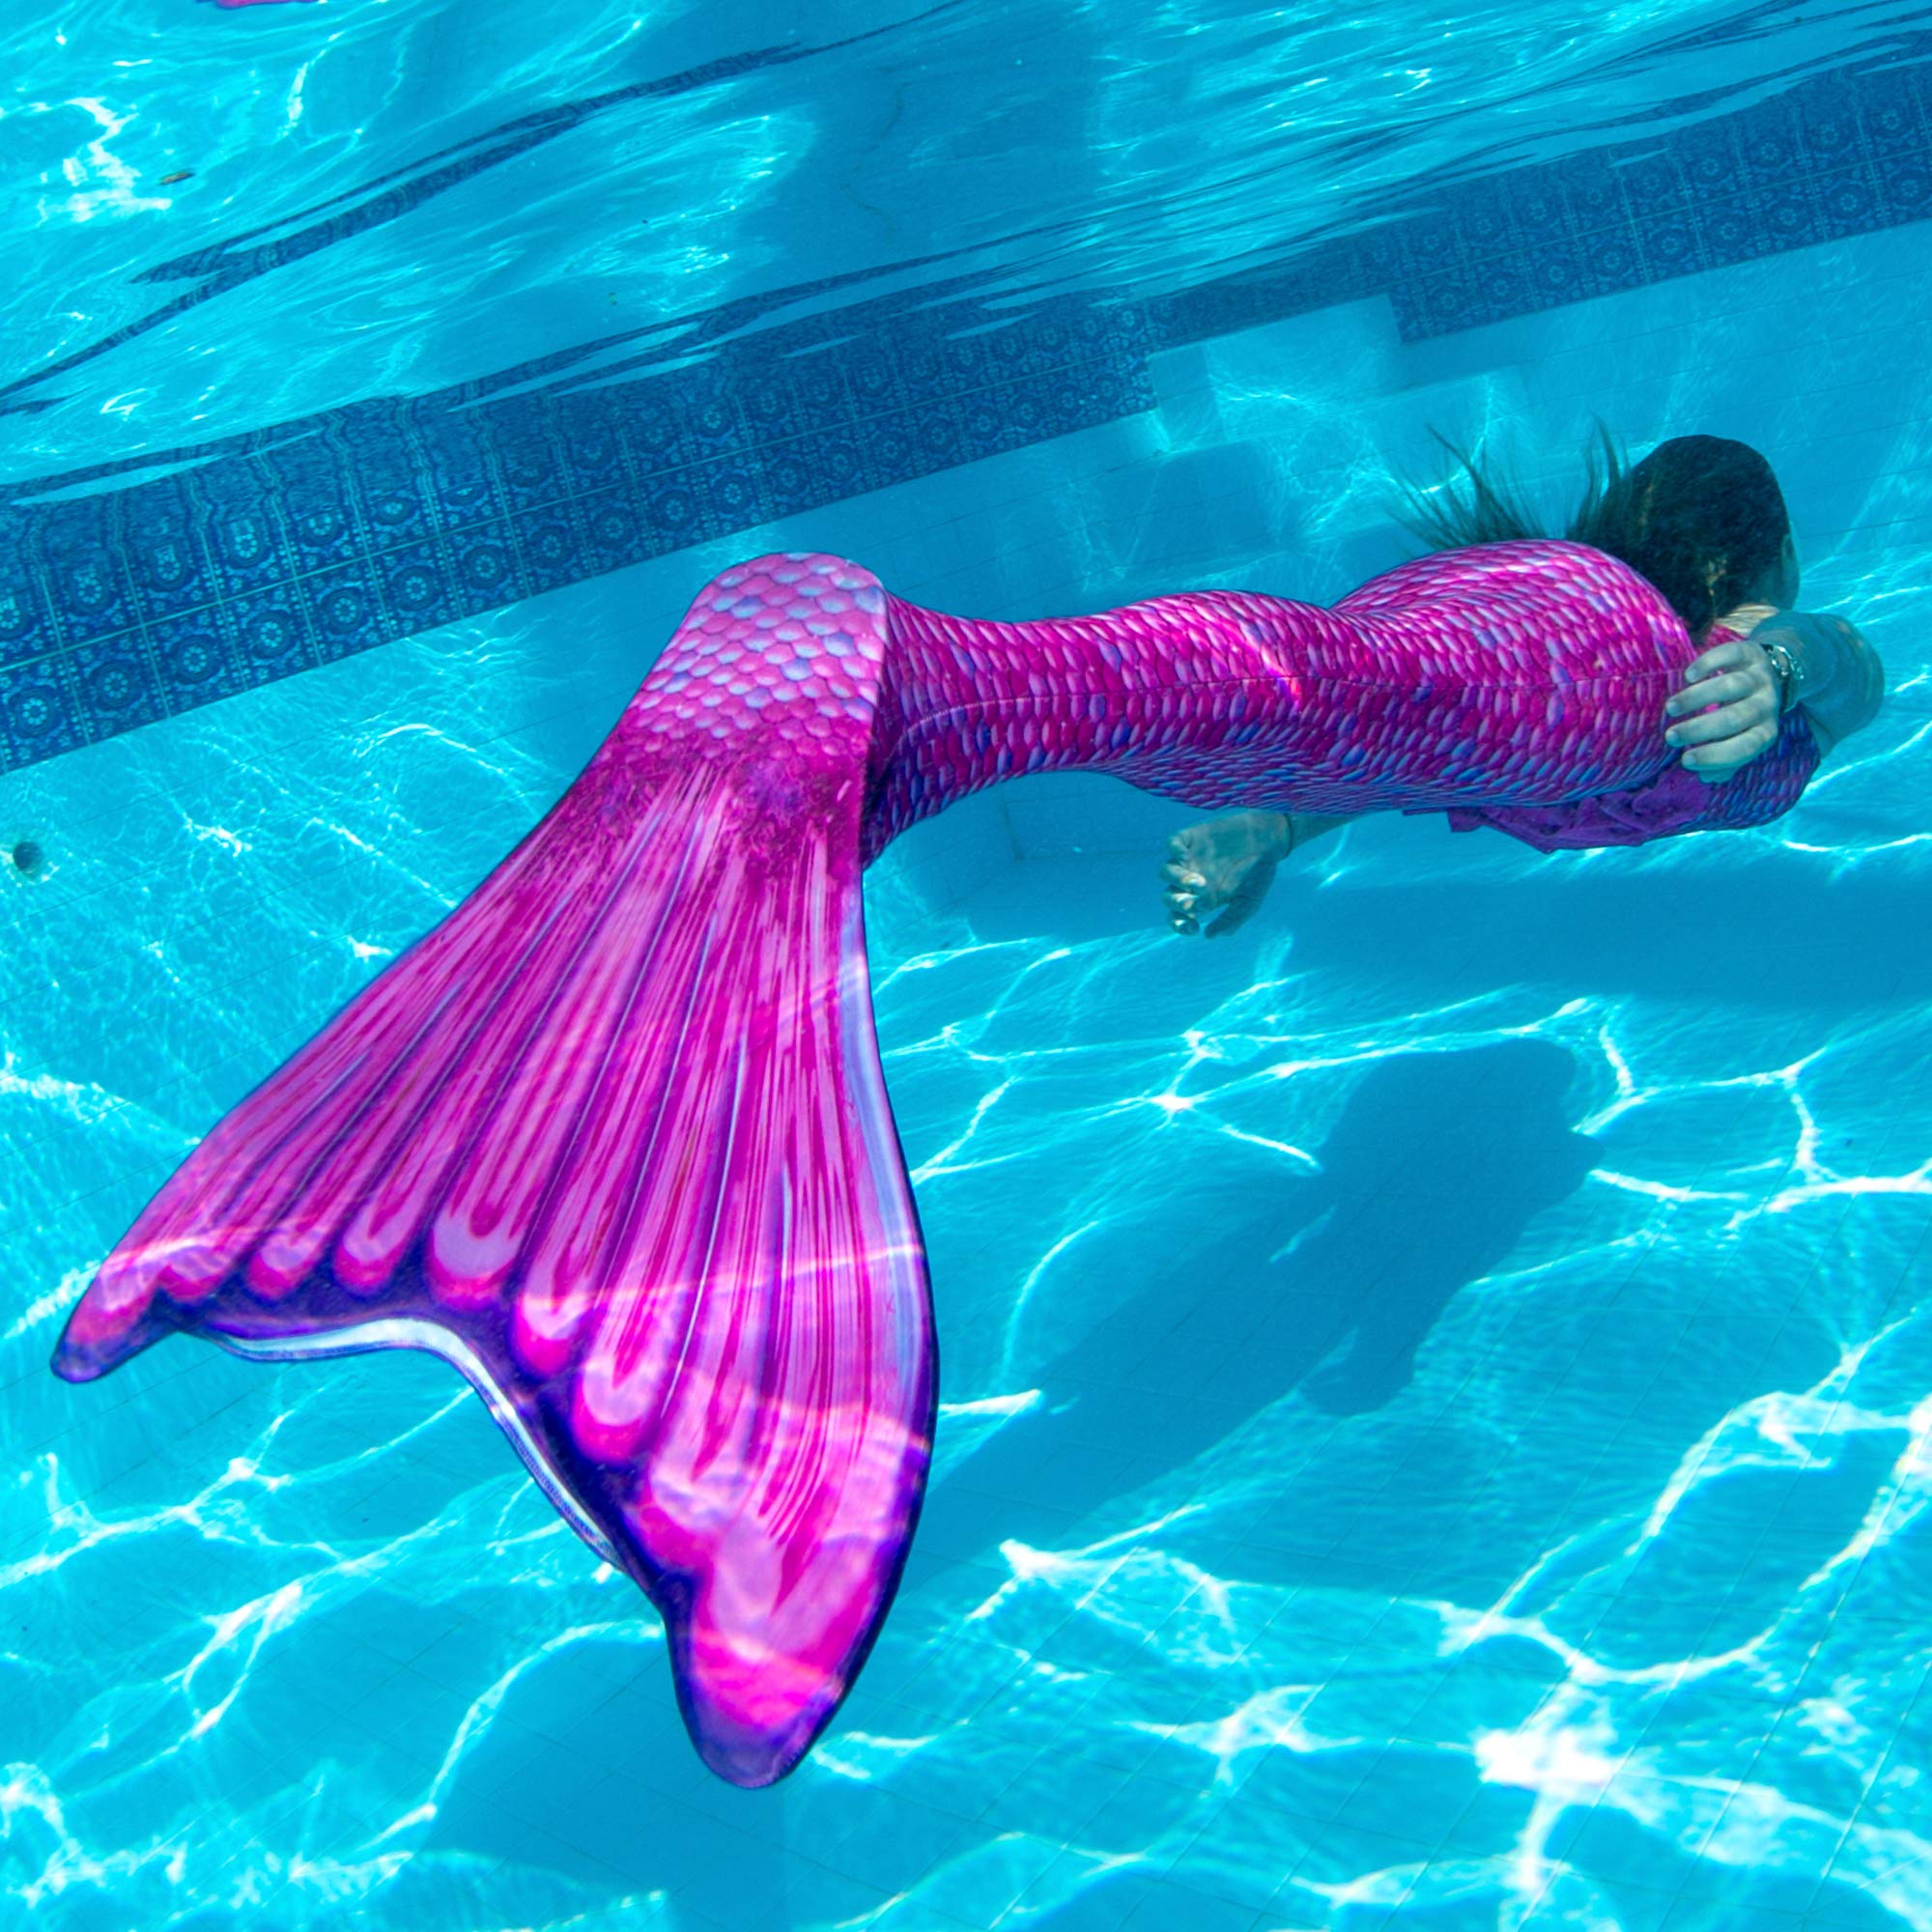 Fin Fun Mermaidens - Mermaid Tails for Swimming for Girls and Kids with Monofin